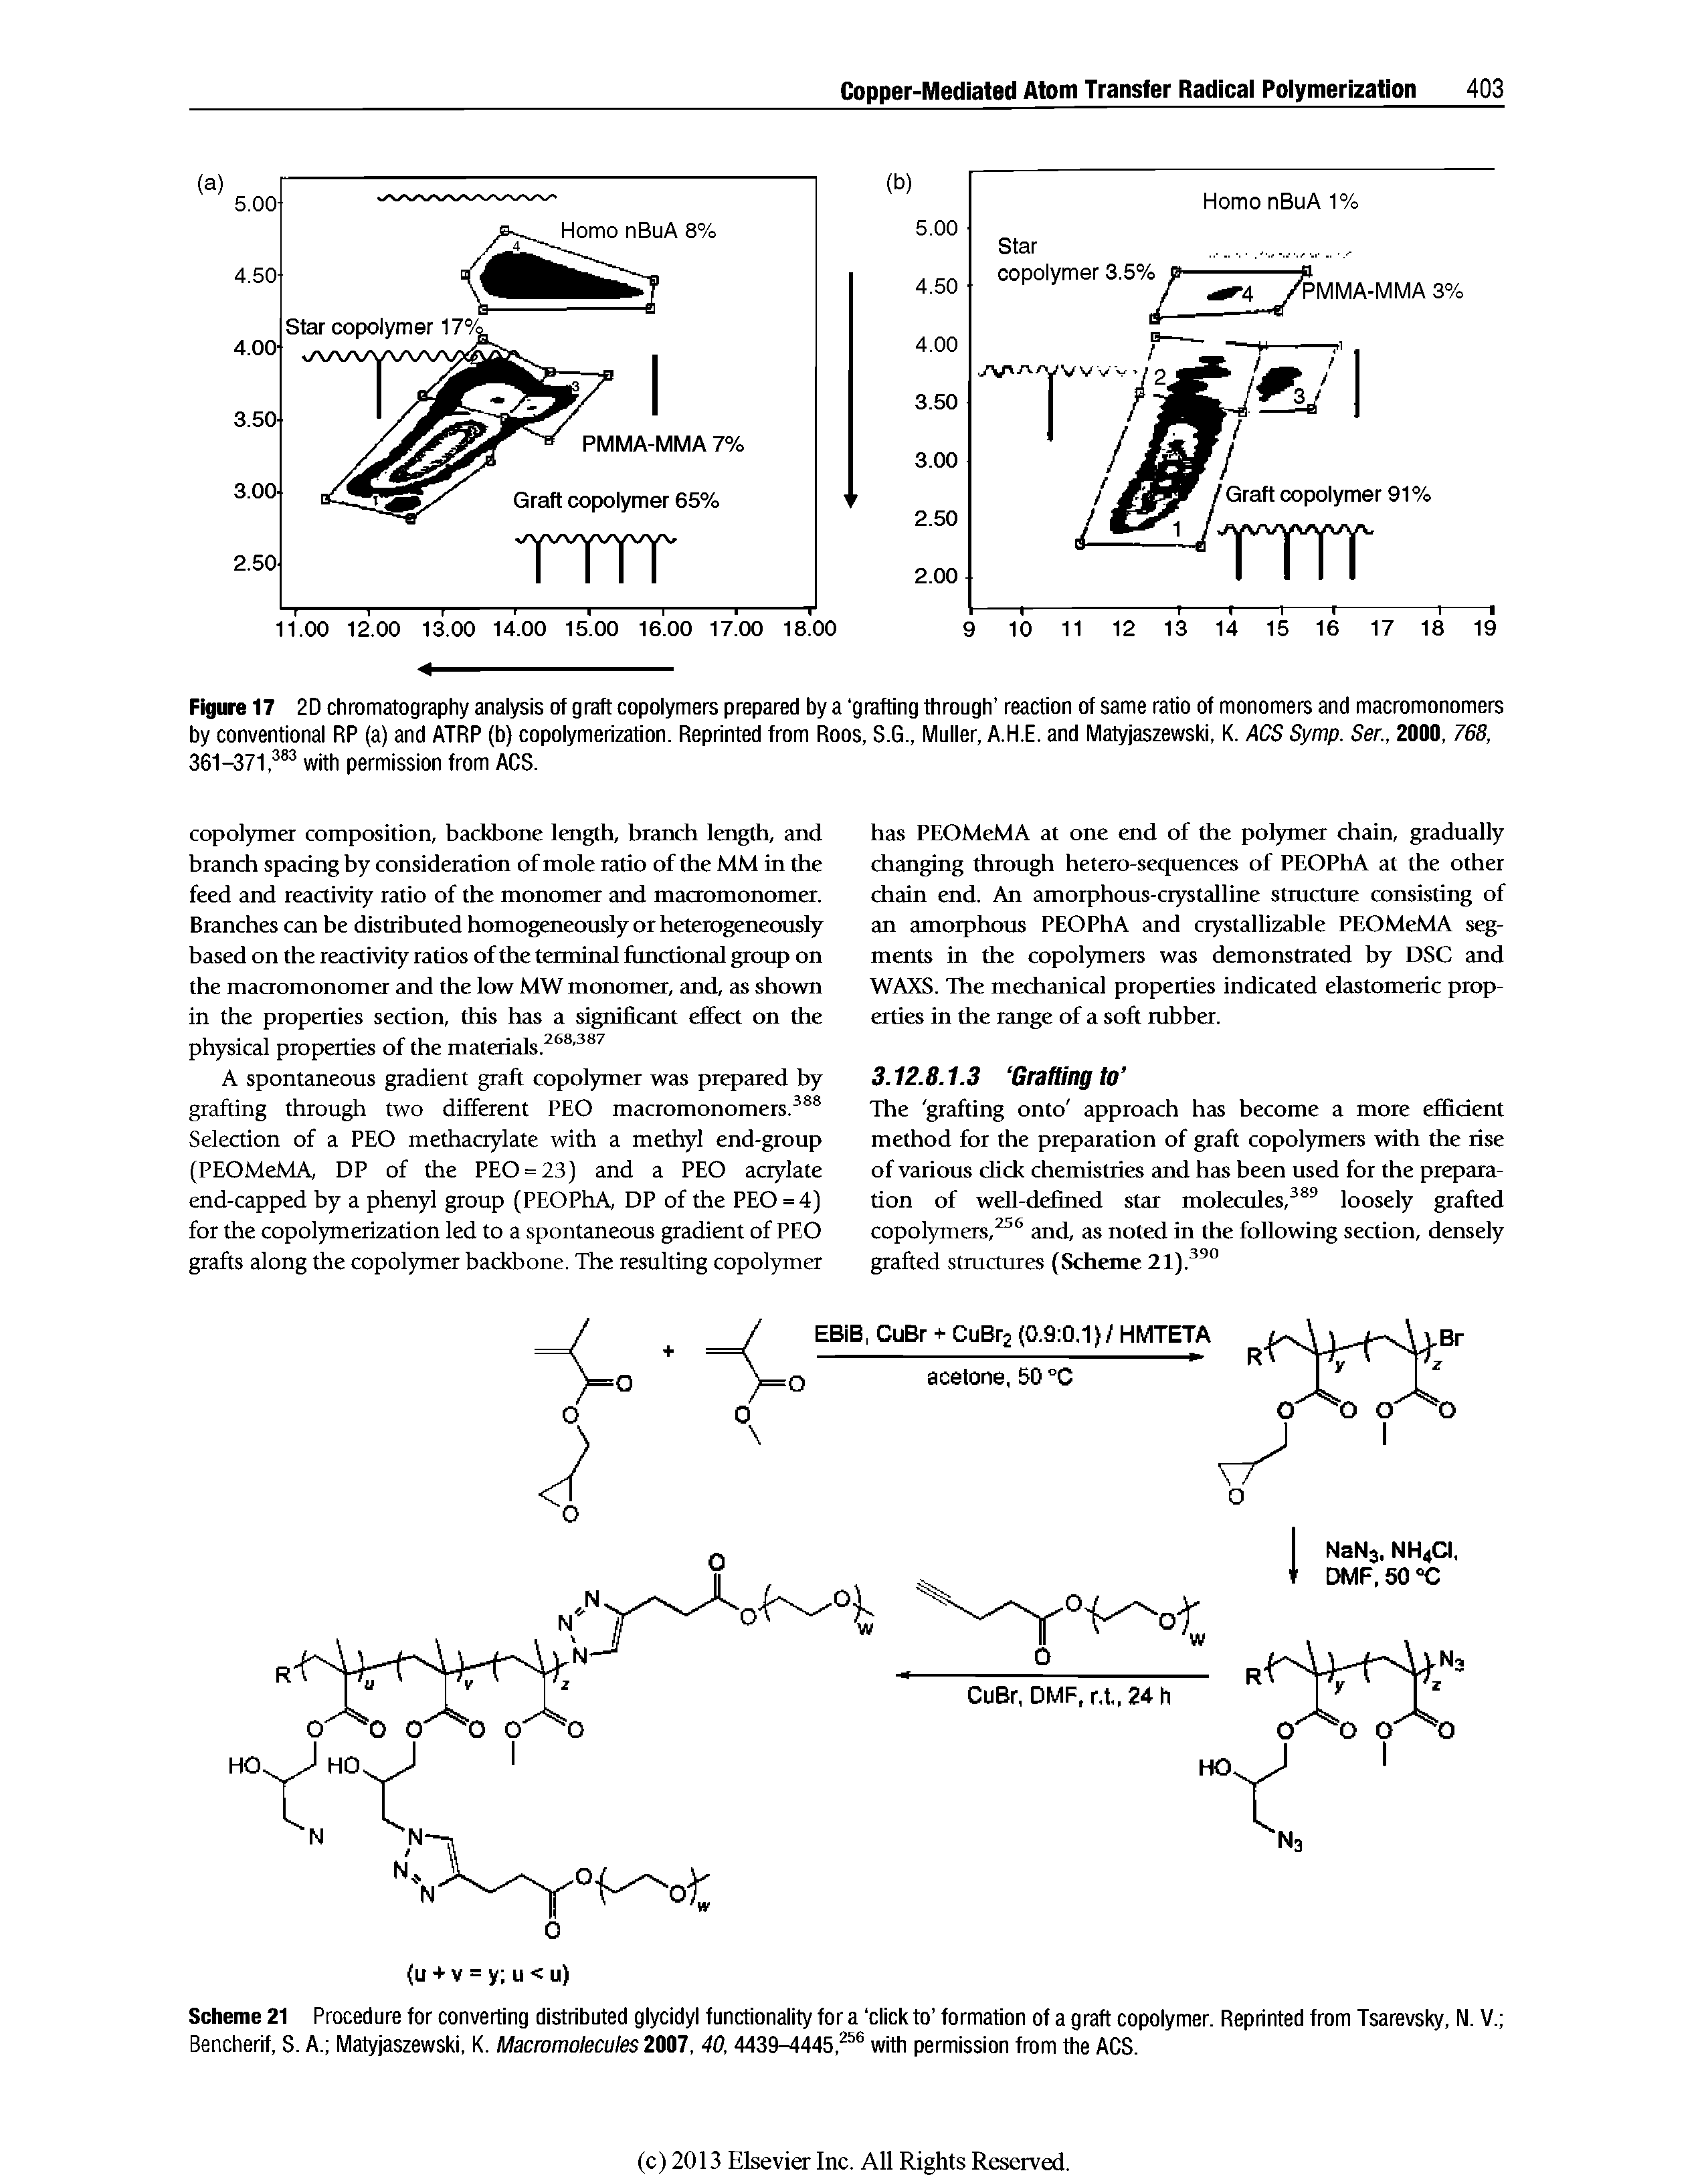 Scheme 21 Procedure for converting distributed glycidyl functionality for a click to formation of a graft copolymer. Reprinted from Tsarevsky, N. V. Bencherif, S. A. Matyjaszewski, K. Macromolecules 2007, 40,4439-4445, with permission from the ACS.